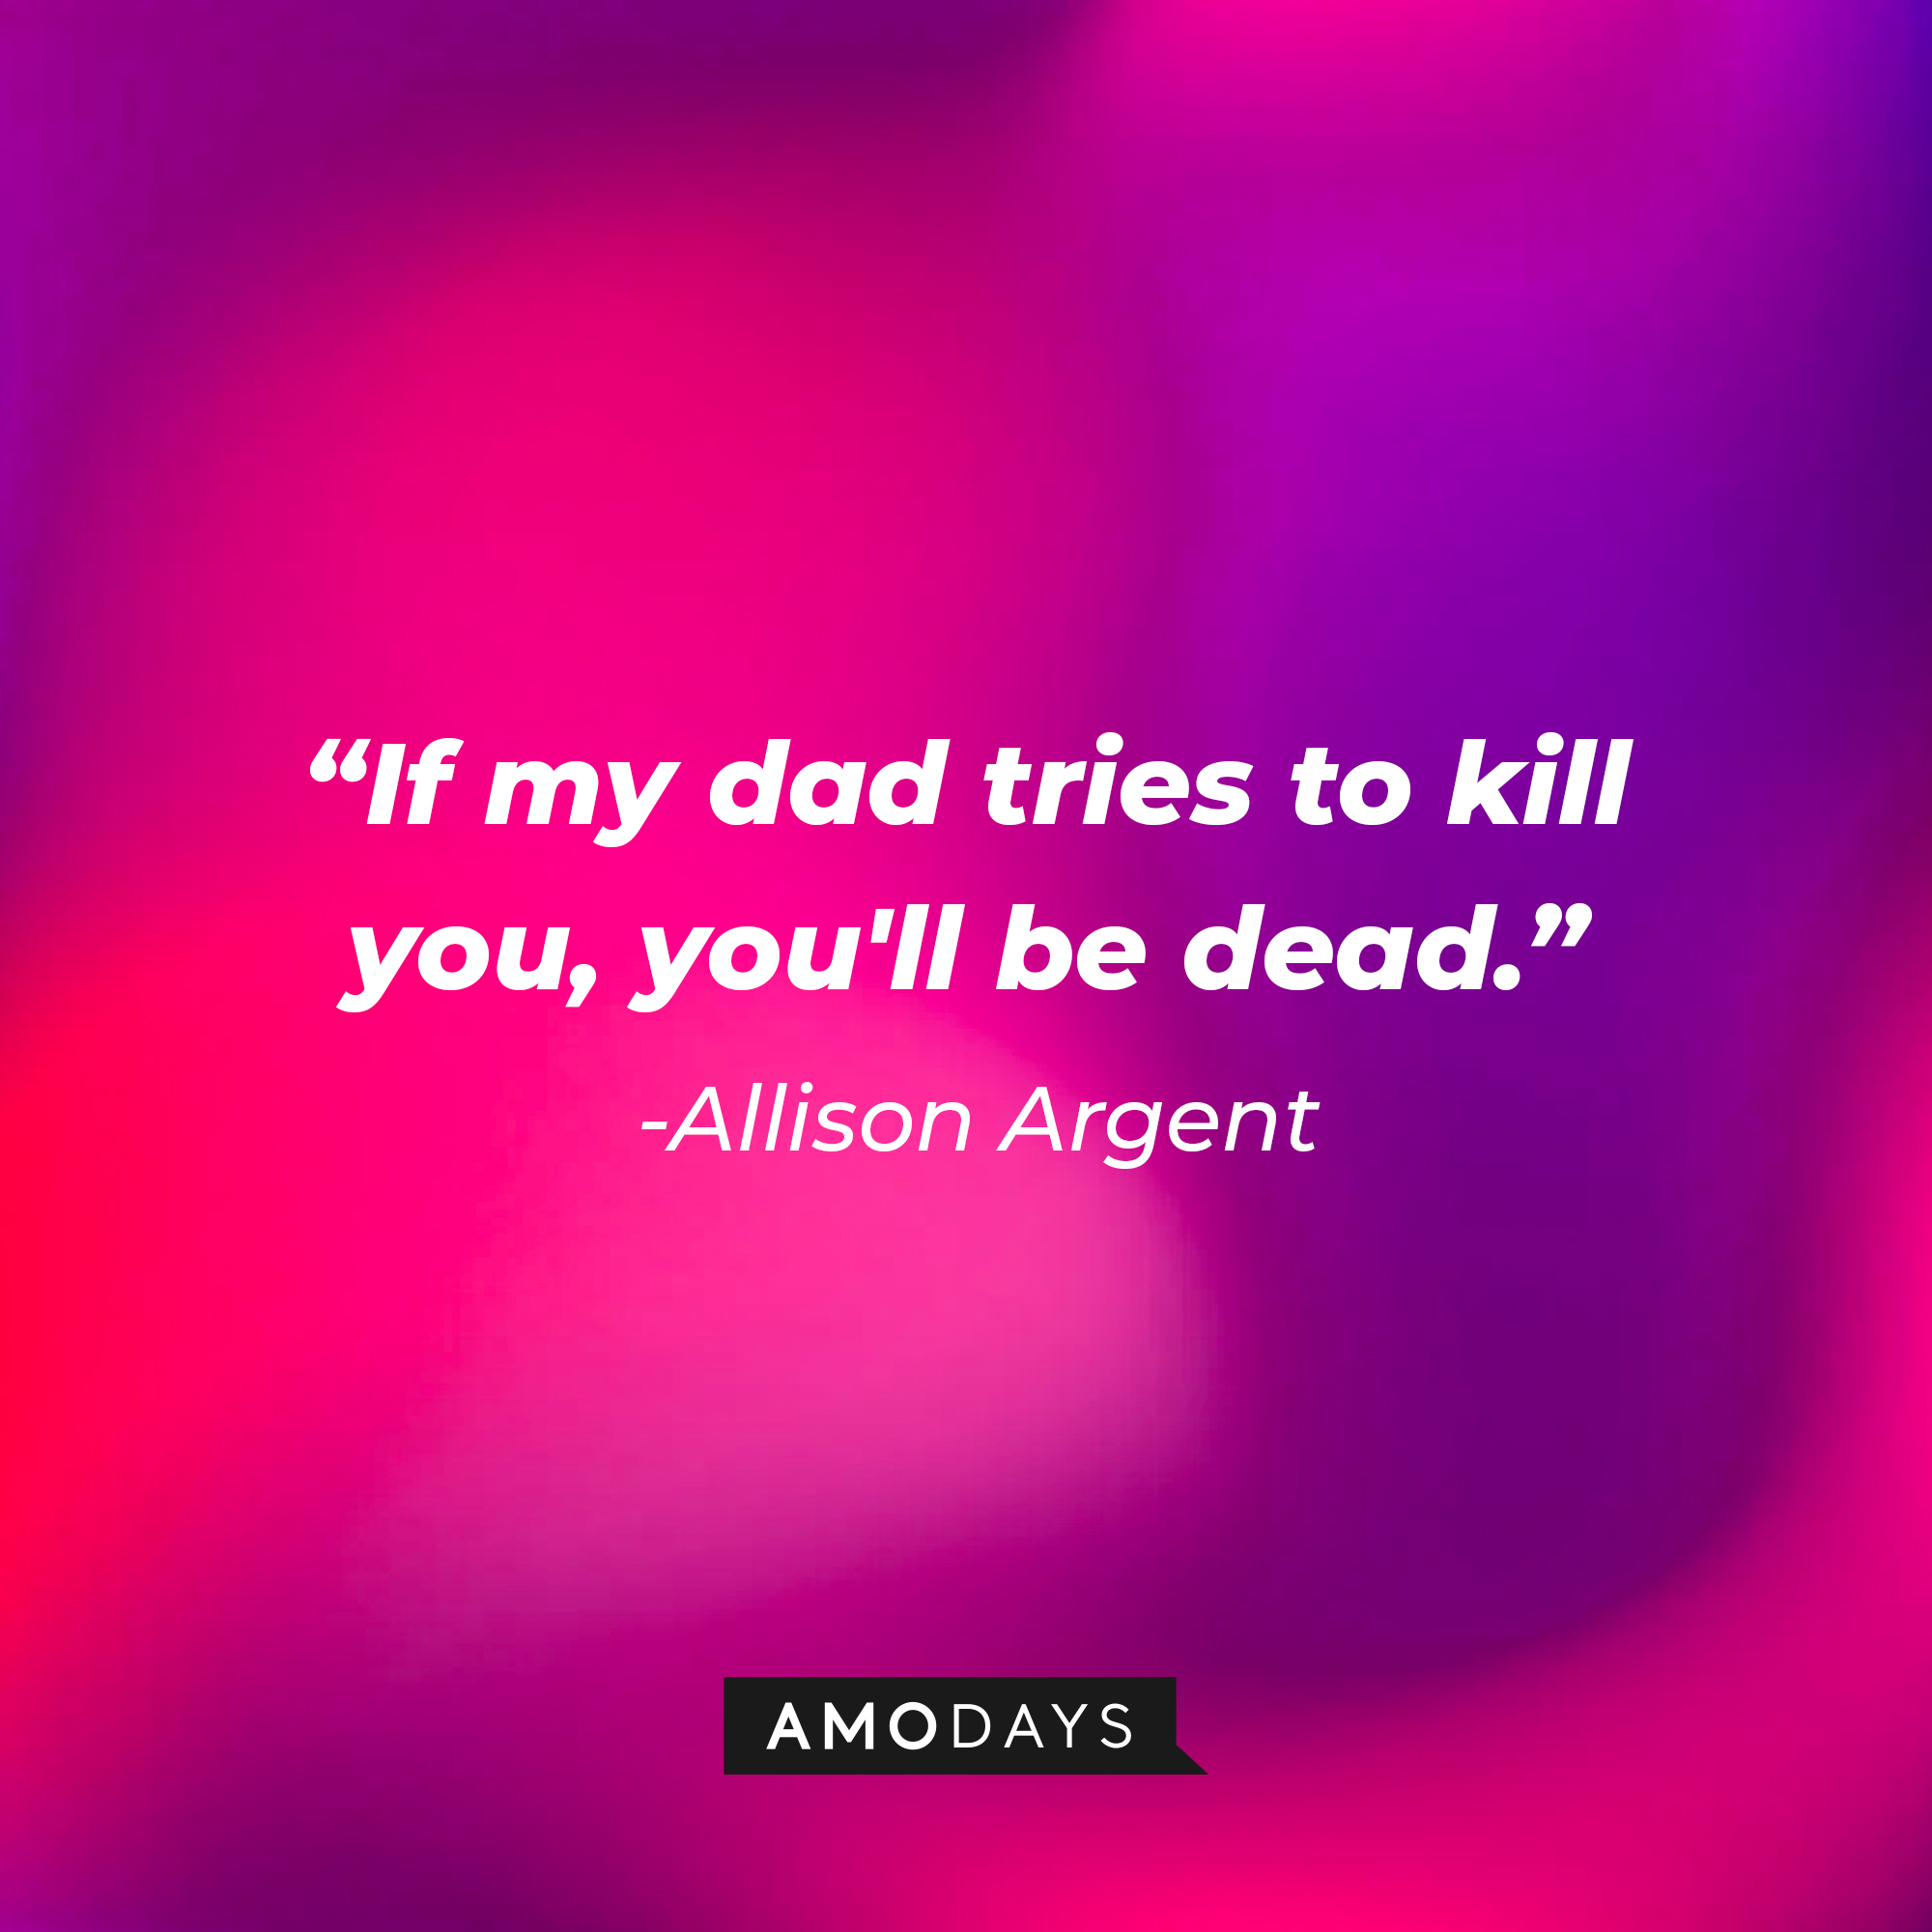 Allison Argen’s quote: "If my dad tries to kill you, you'll be dead." | Source: AmoDays